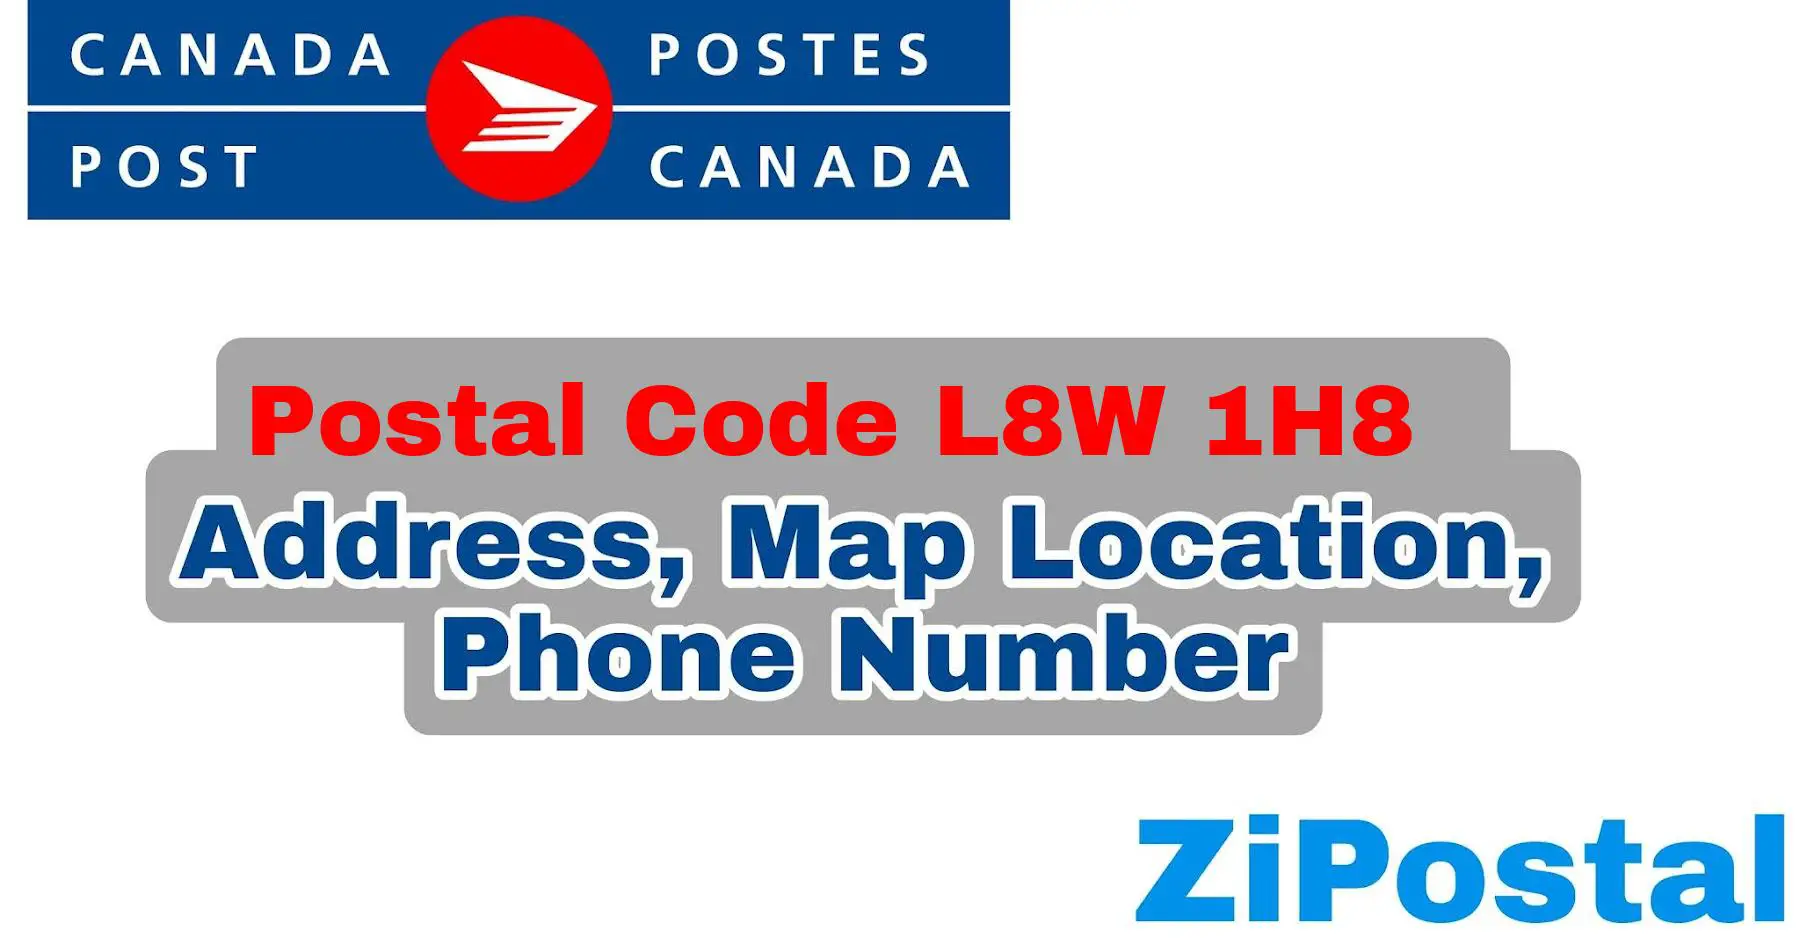 Postal Code L8W 1H8 Address Map Location and Phone Number